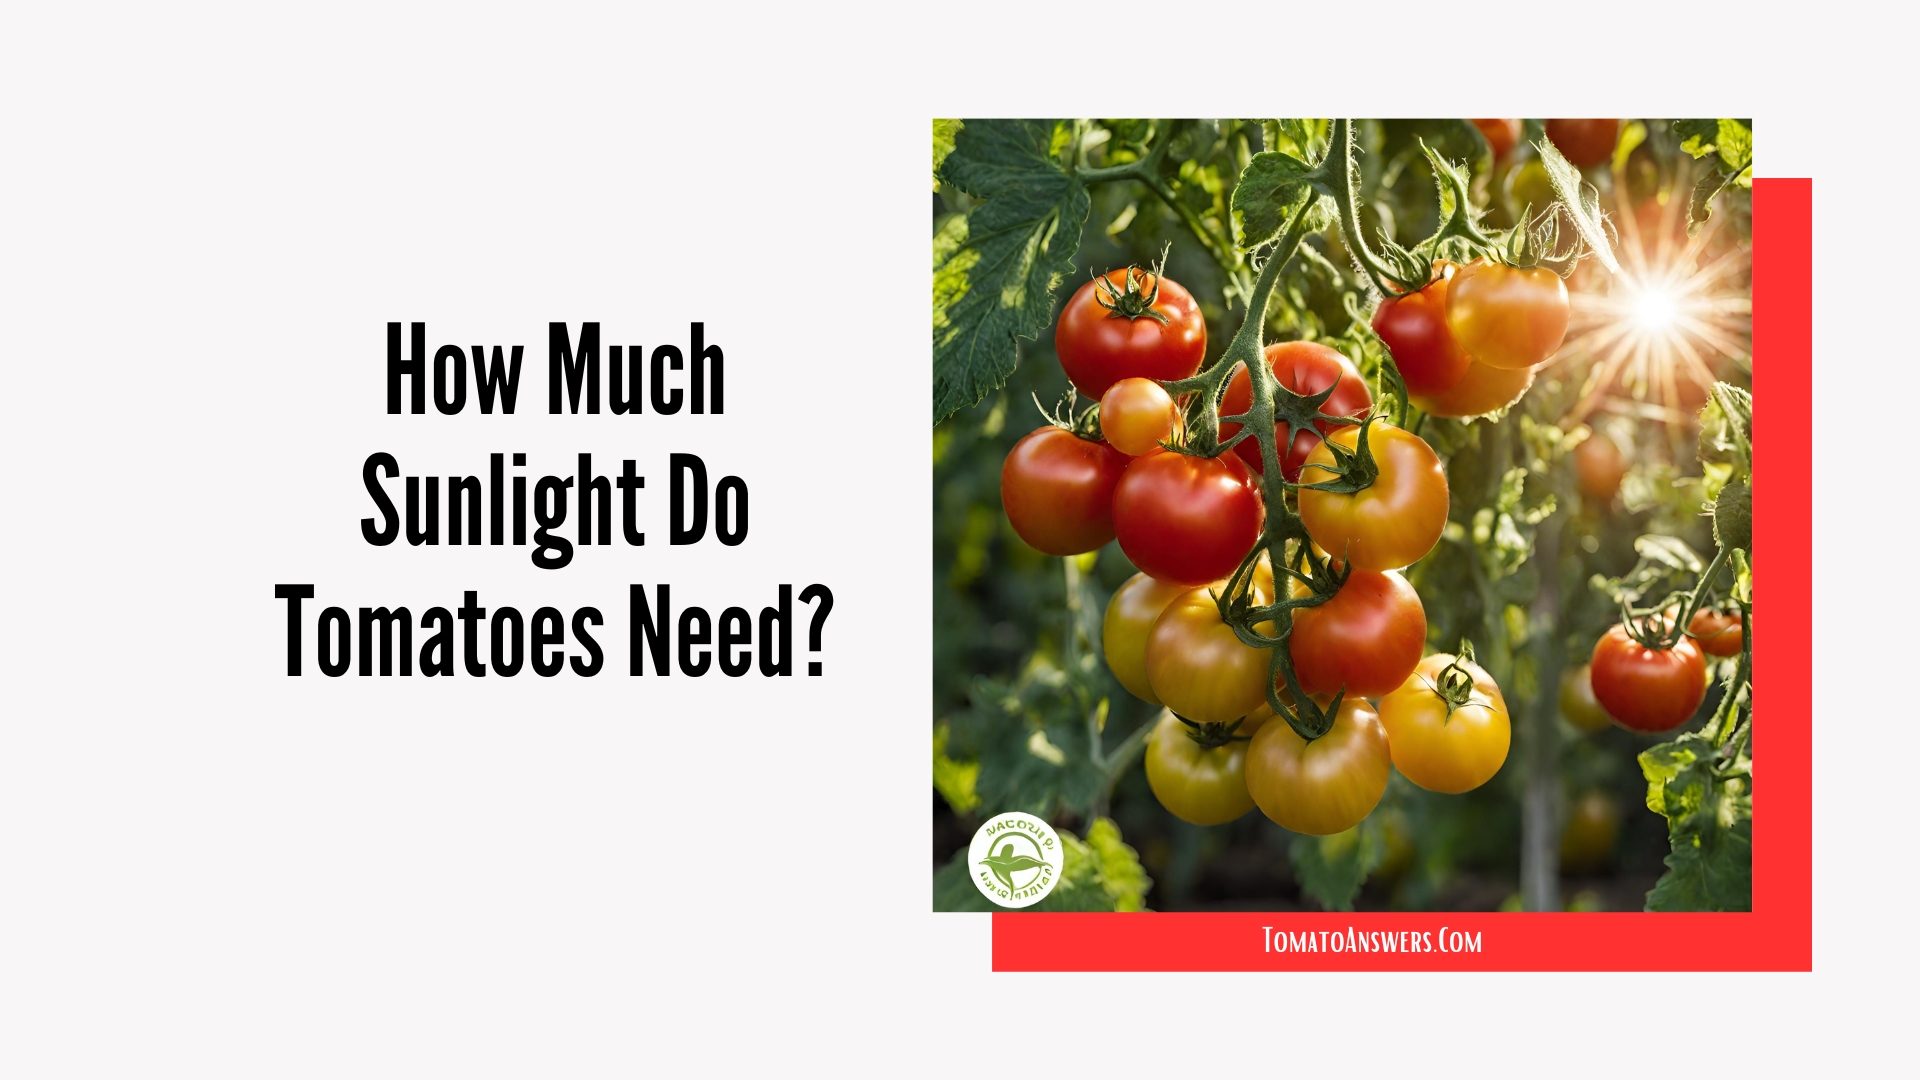 How Much Sunlight Do Tomatoes Need